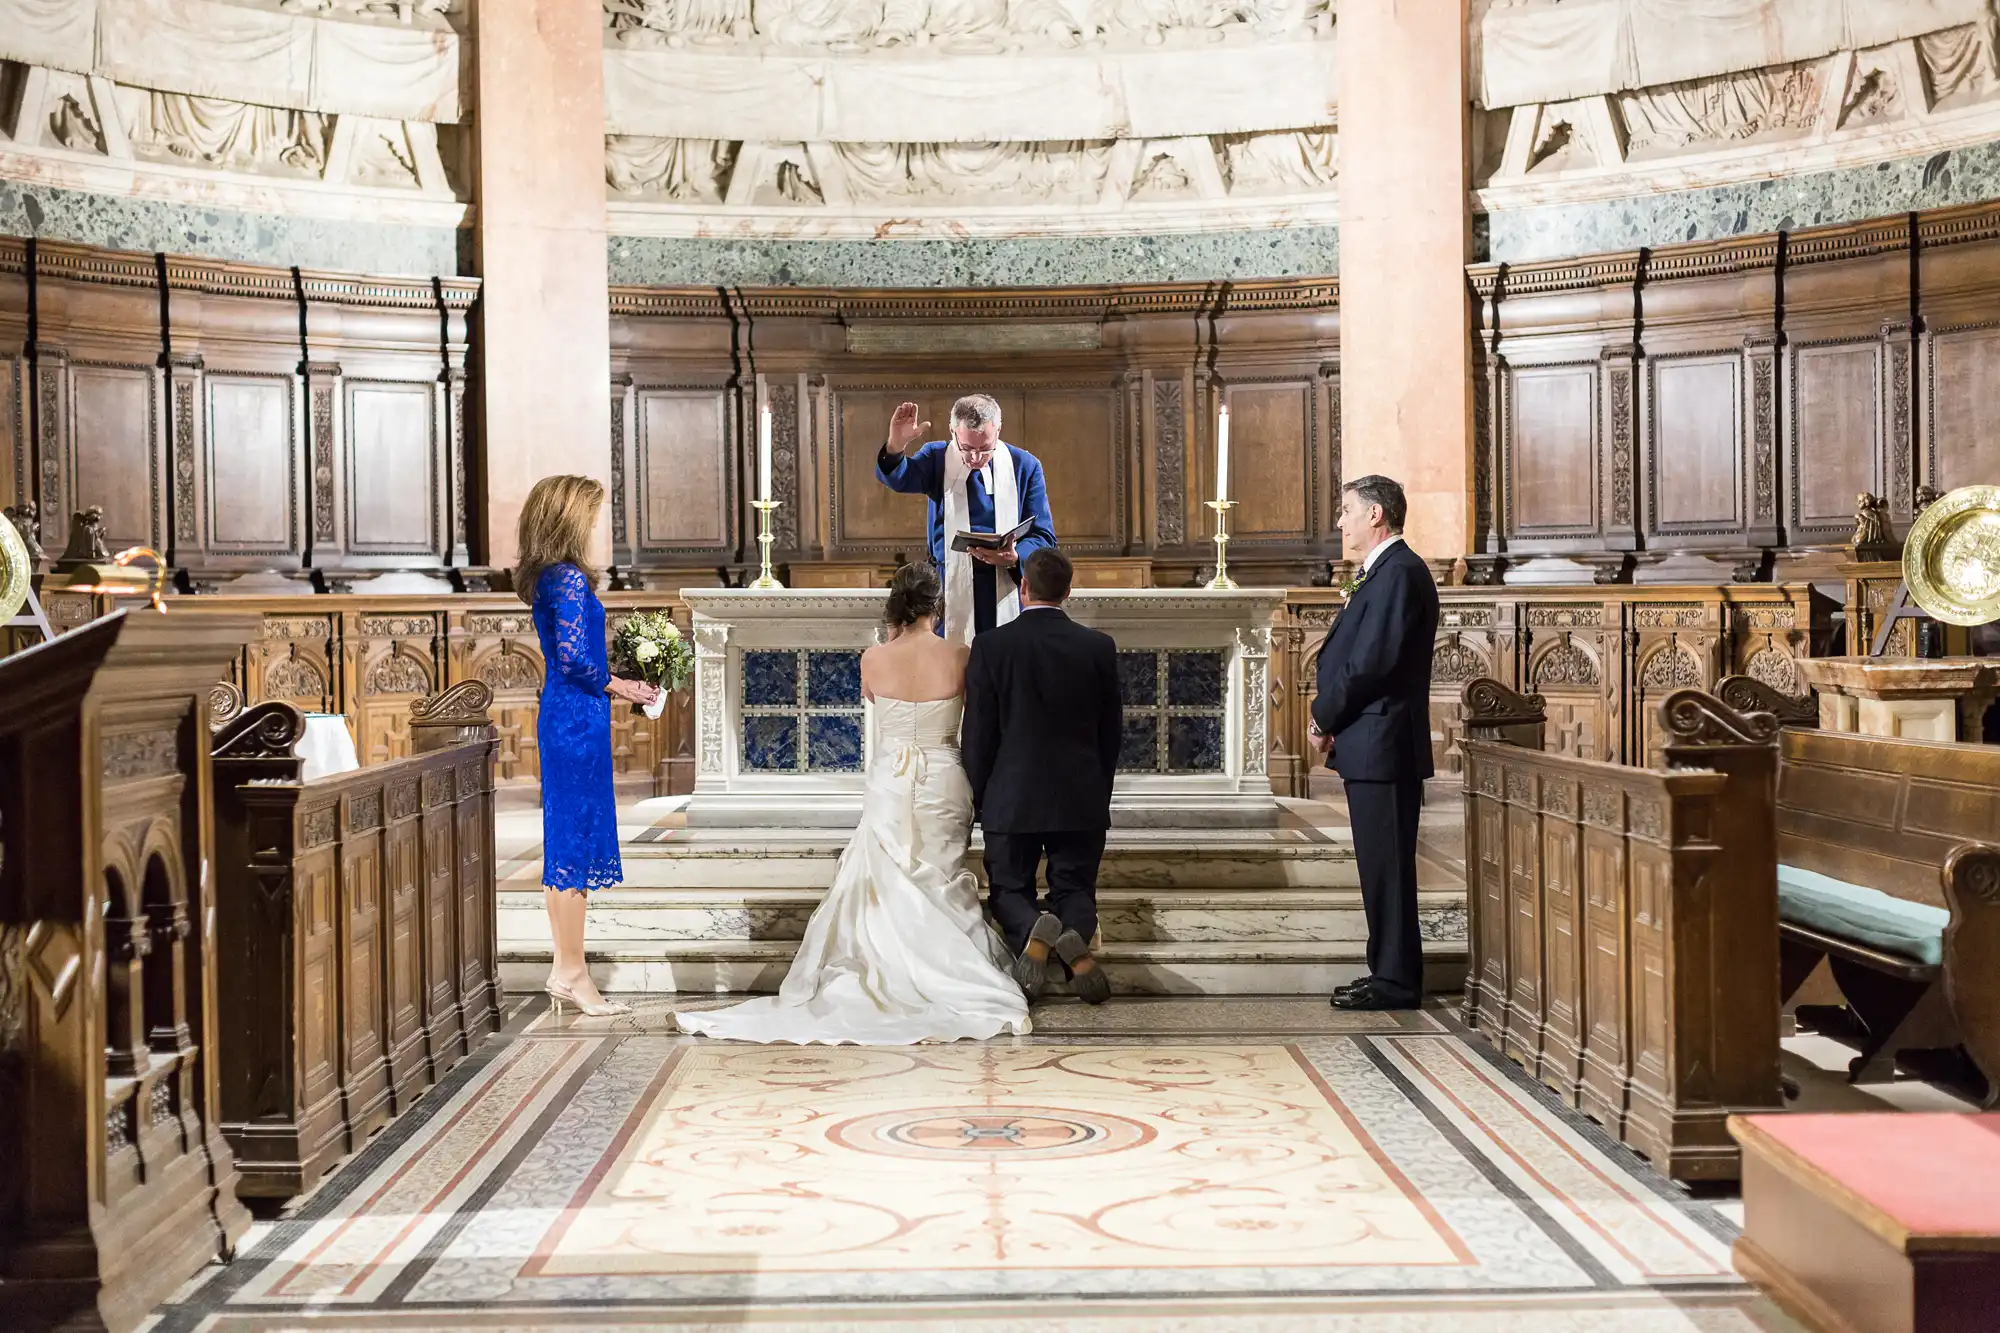 A wedding ceremony in a richly decorated church, with the bride and groom facing the officiant, and two guests watching.